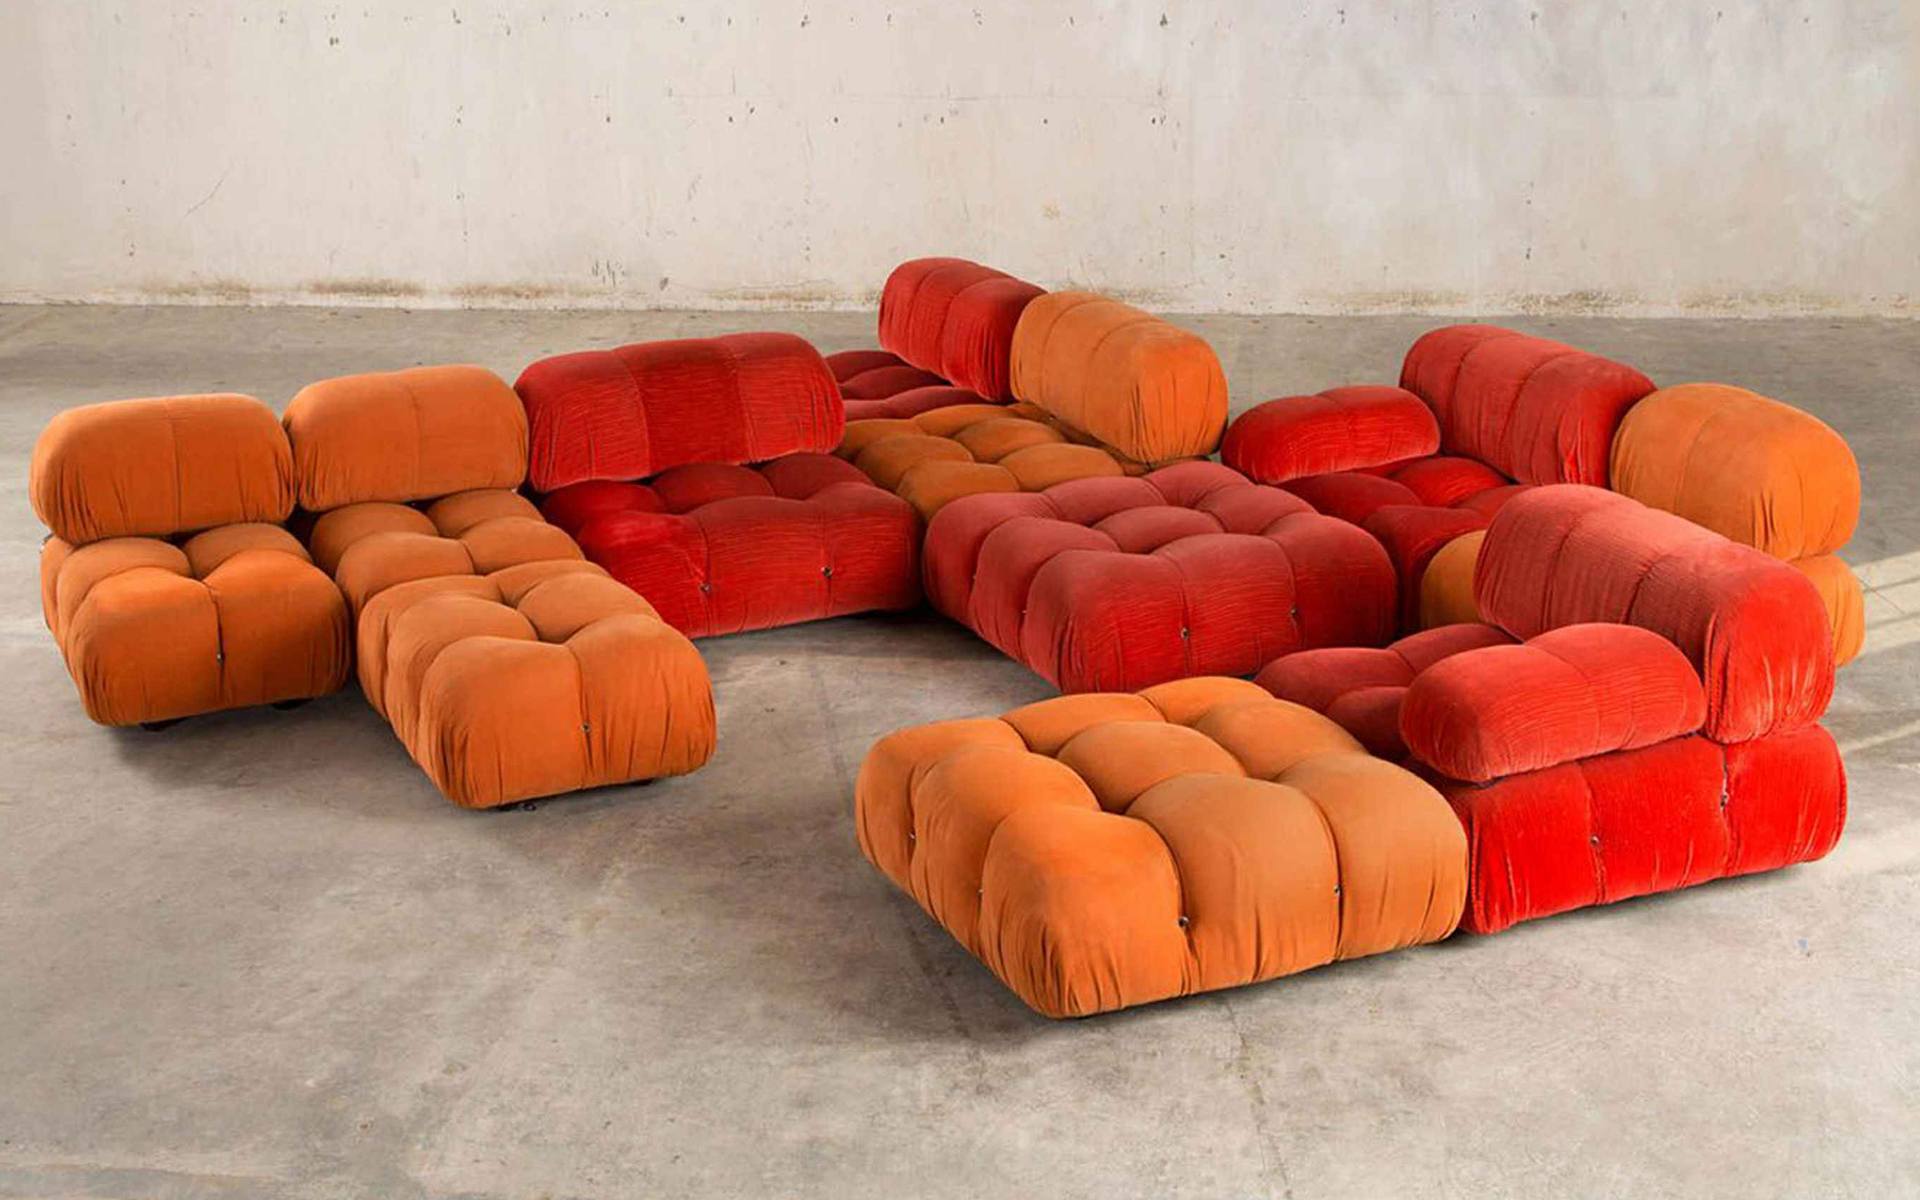 Where Can I Purchase an Authentic Mario Bellini Sofa?